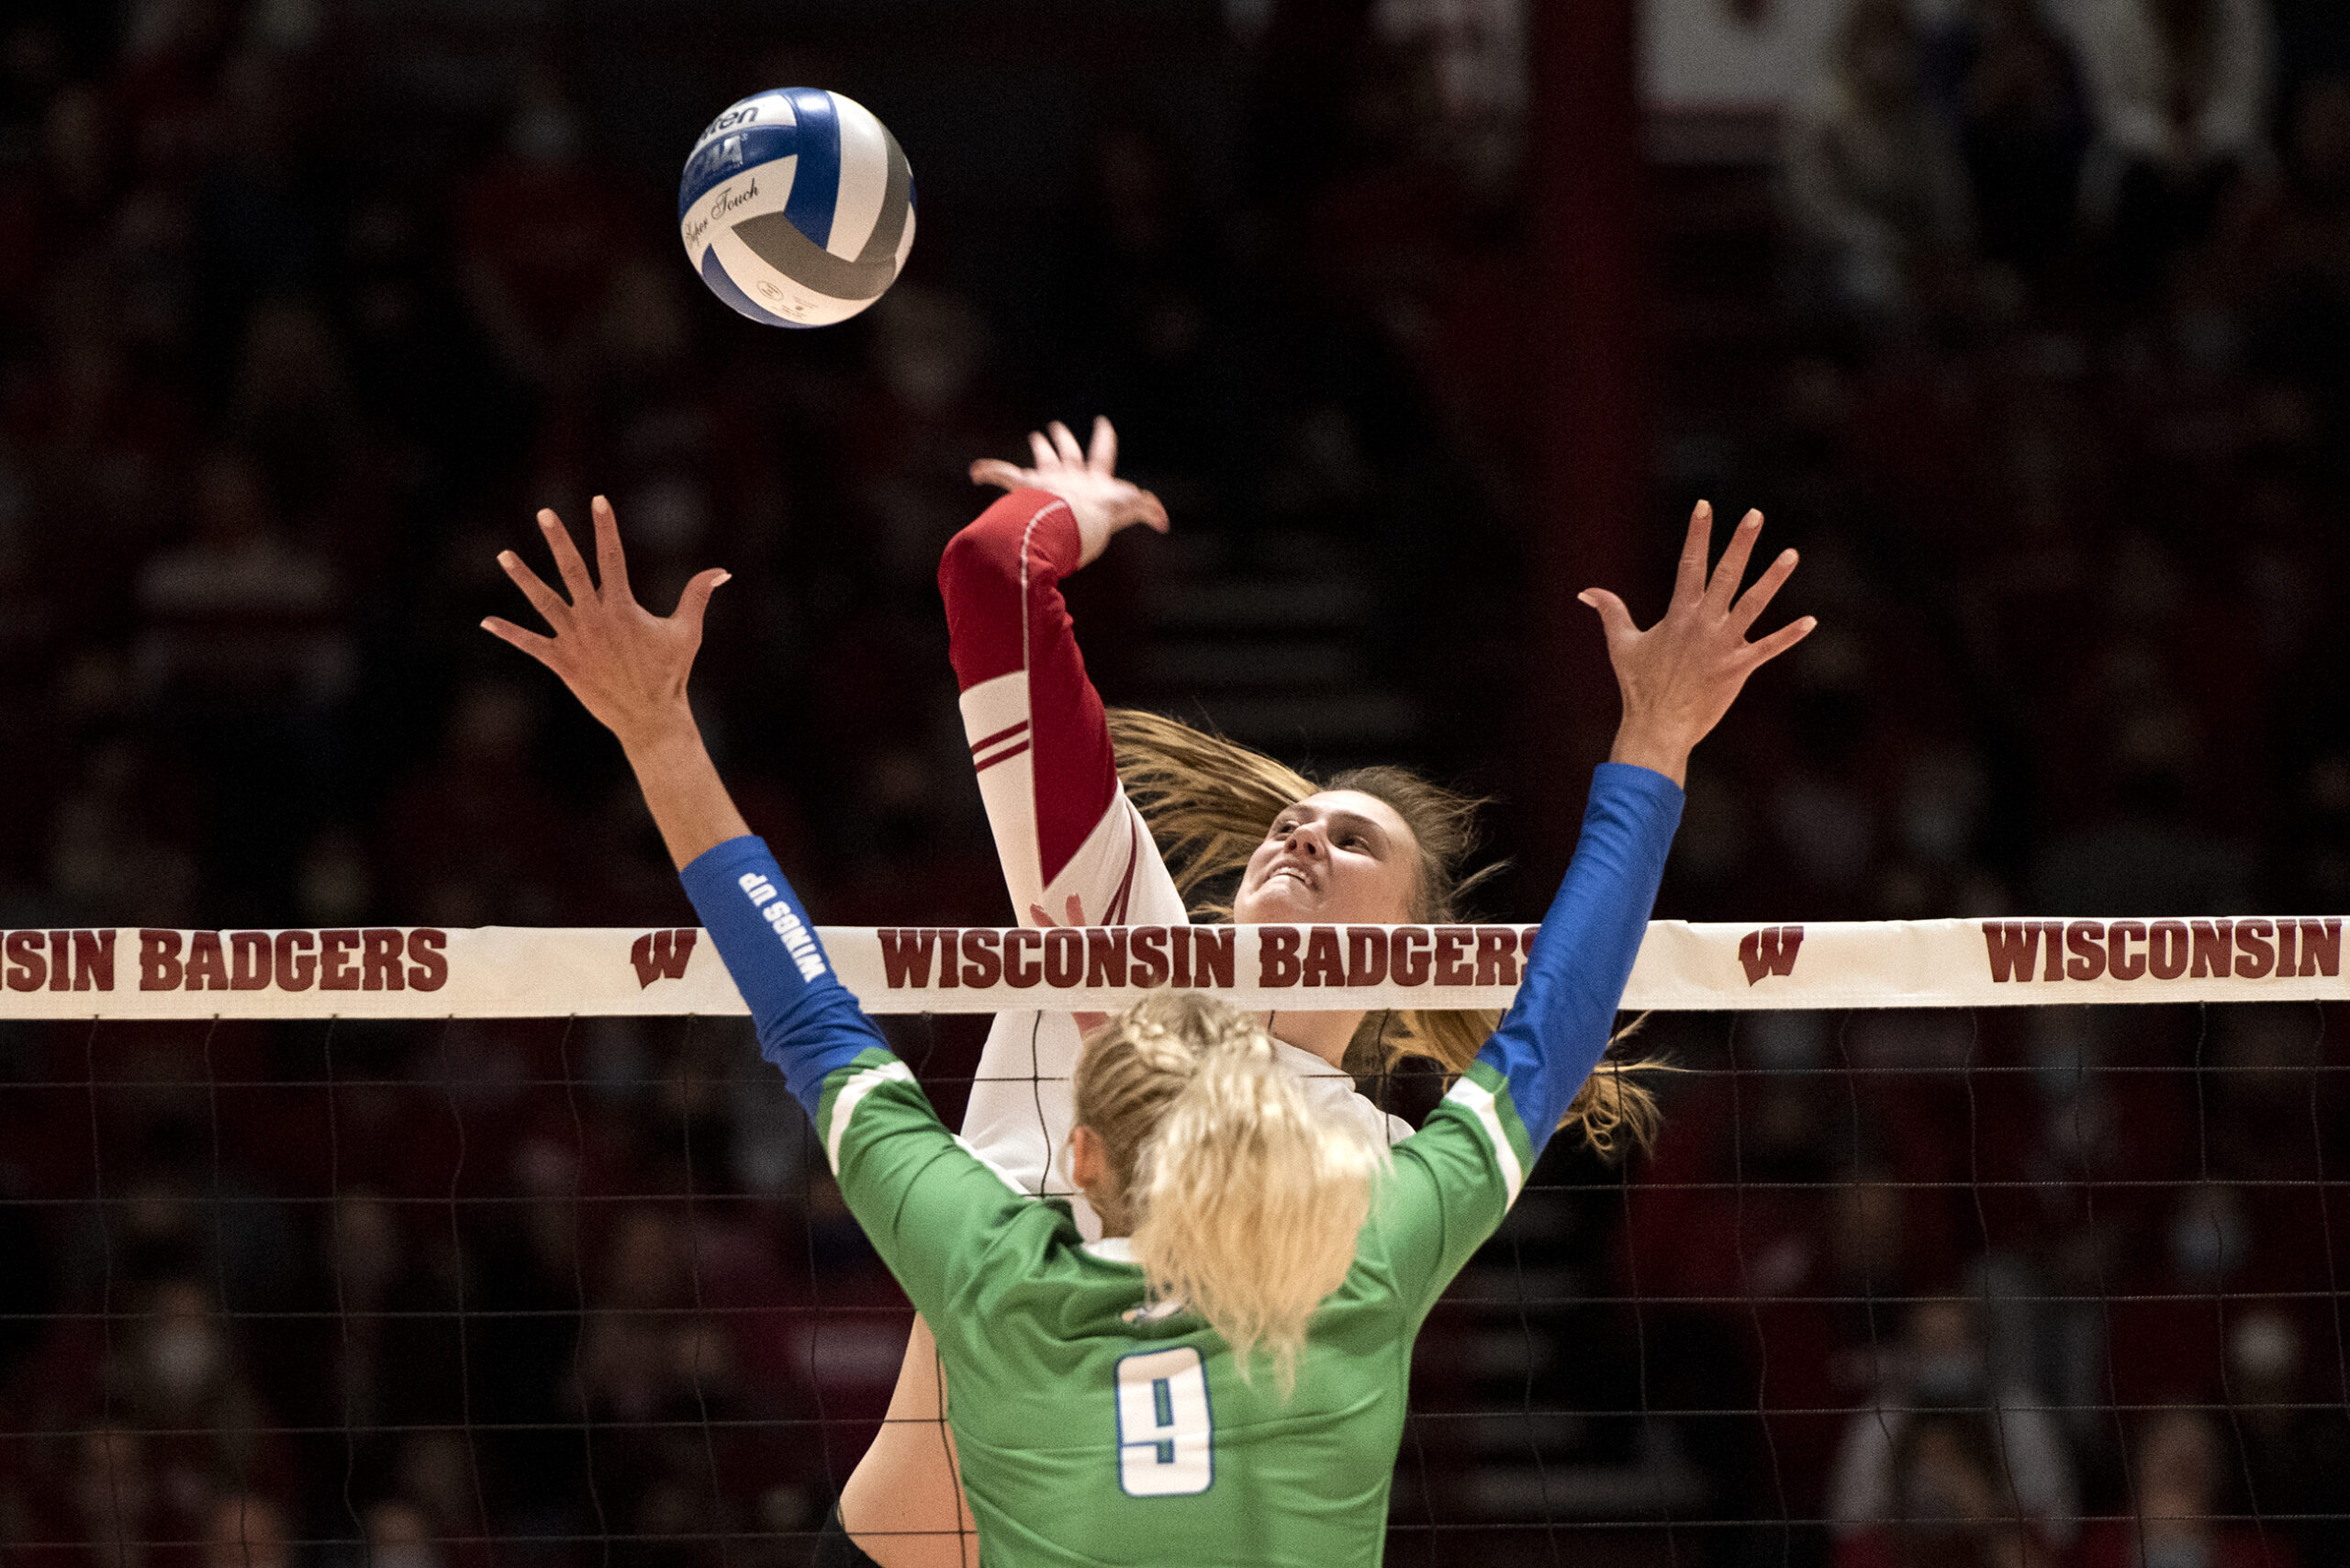 A Badgers player prepares to spike the ball.